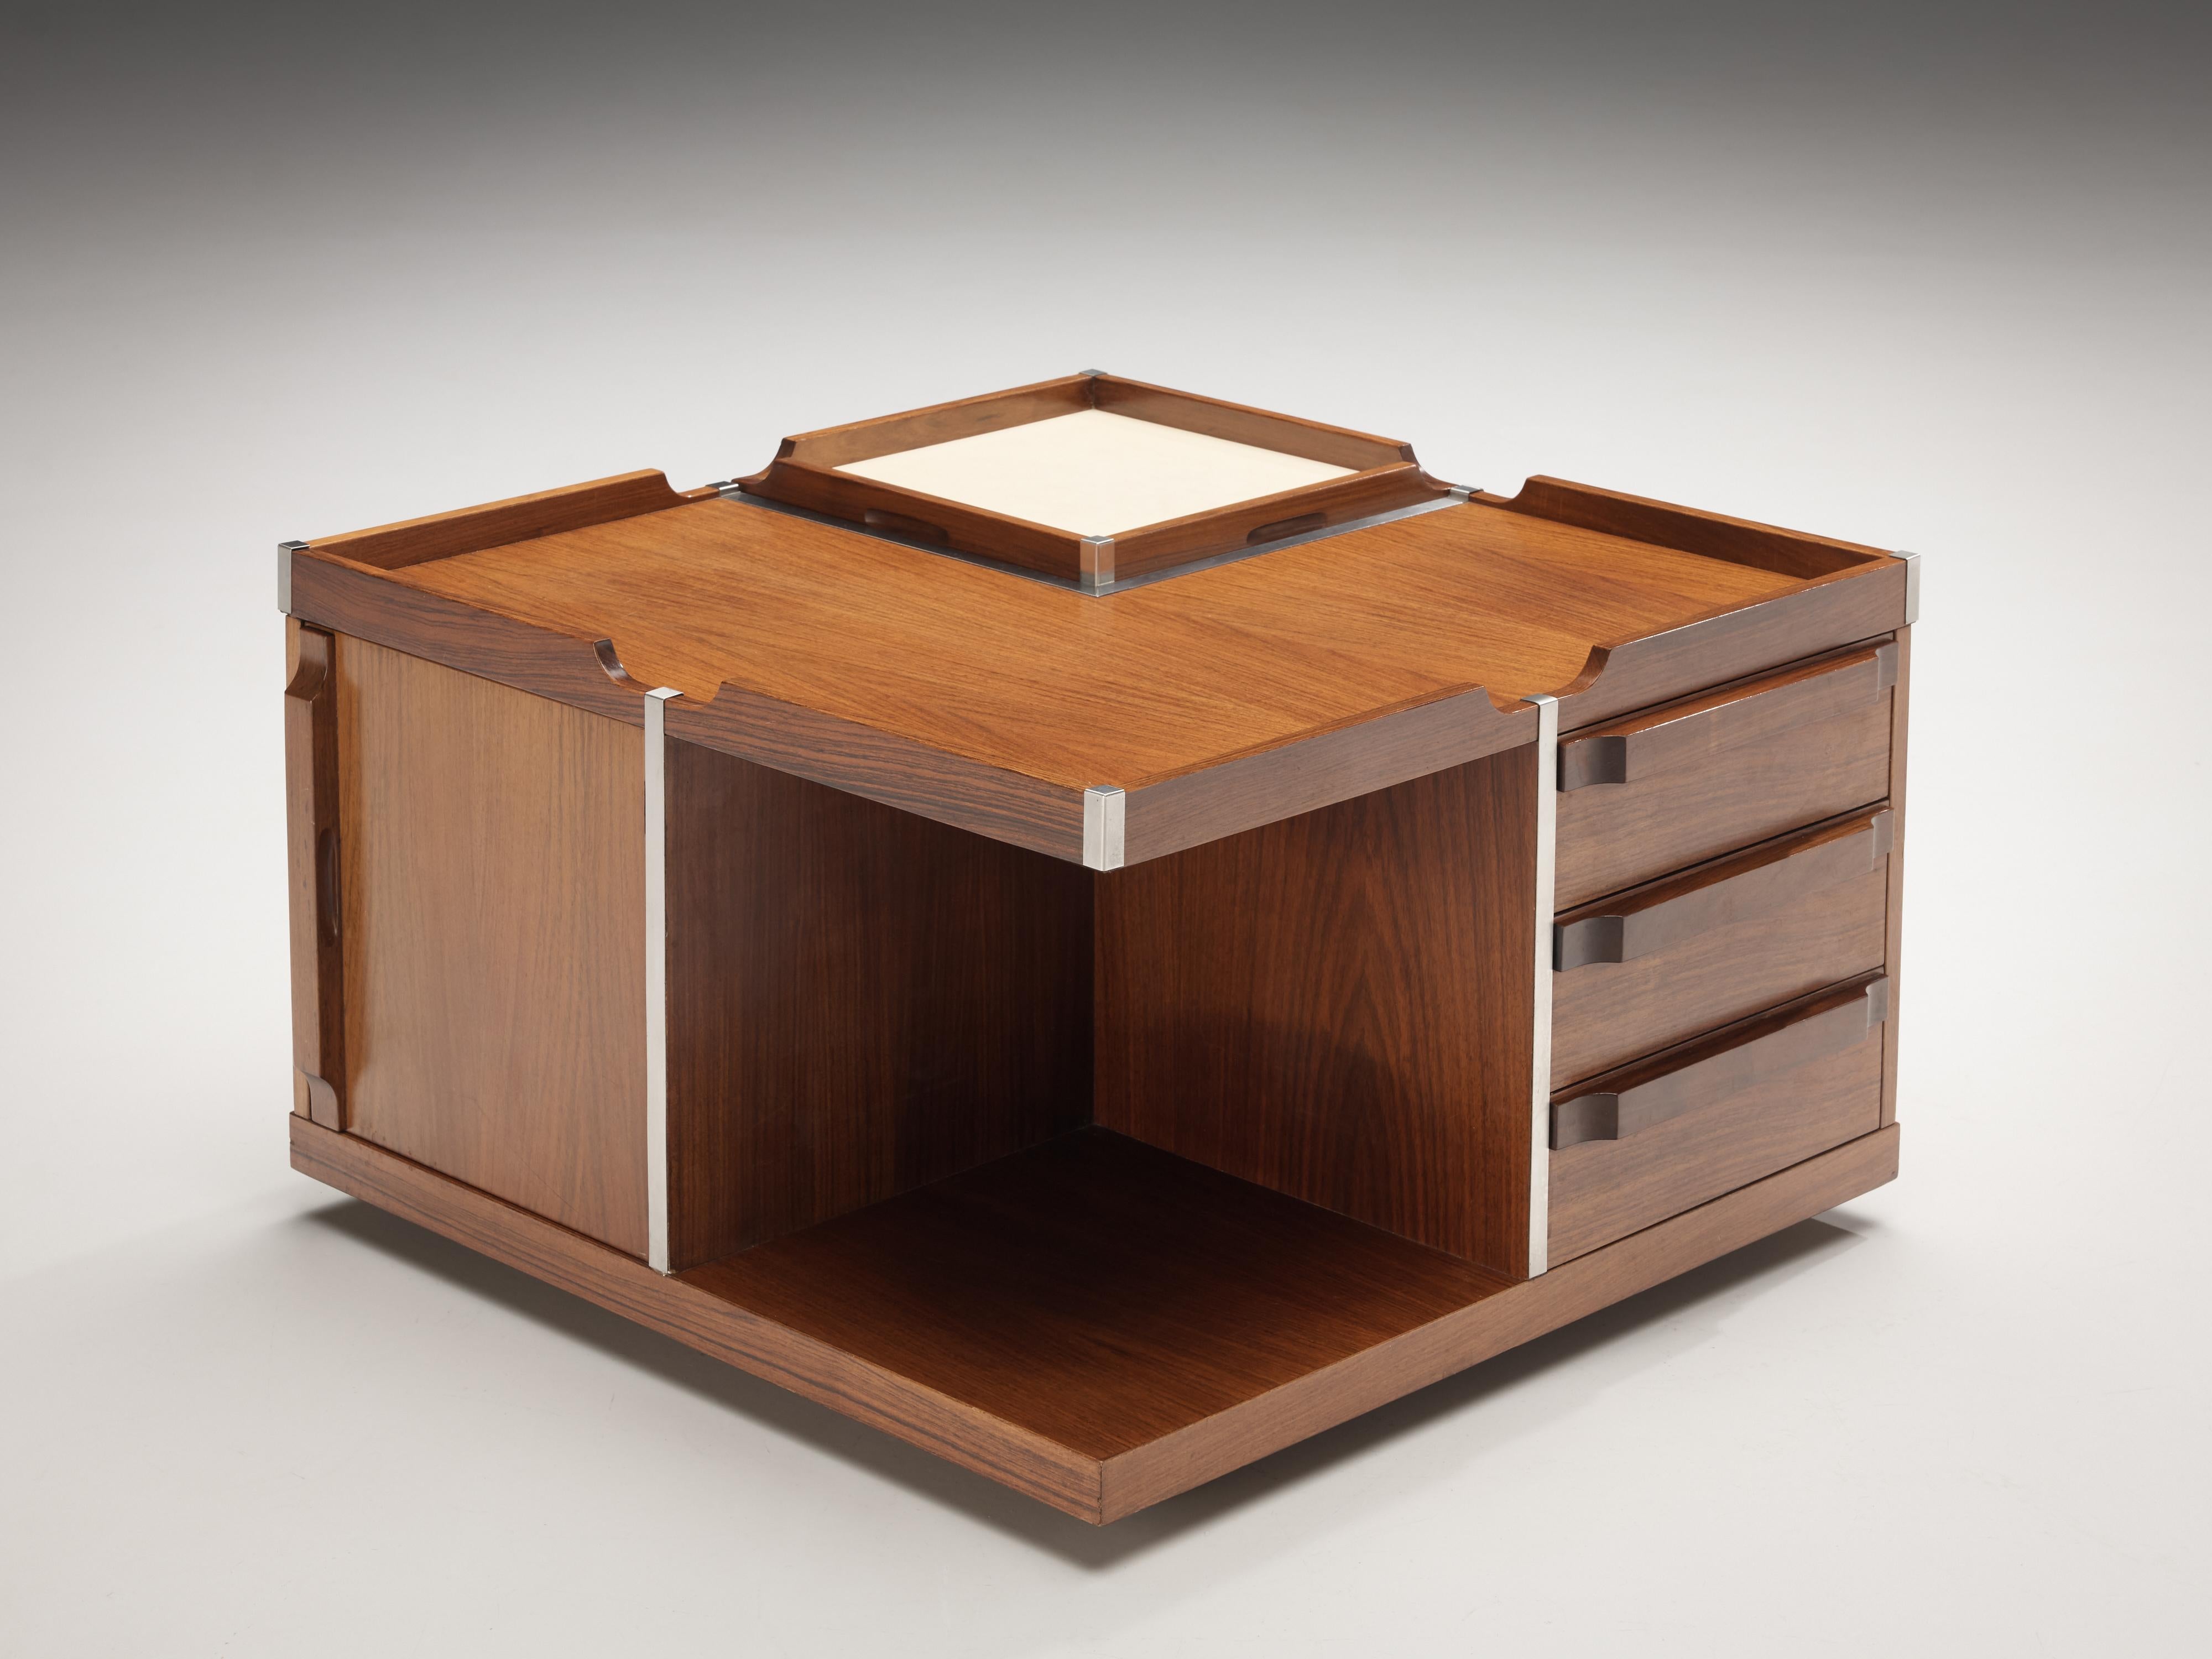 Side table, walnut, metal, Italy, 1970s

This Italian side table combines function with lovely Italian aesthetics of the 1970s. The squared coffee table on wheels presents multiple features. First the dry bar that reveals itself if you pull up the